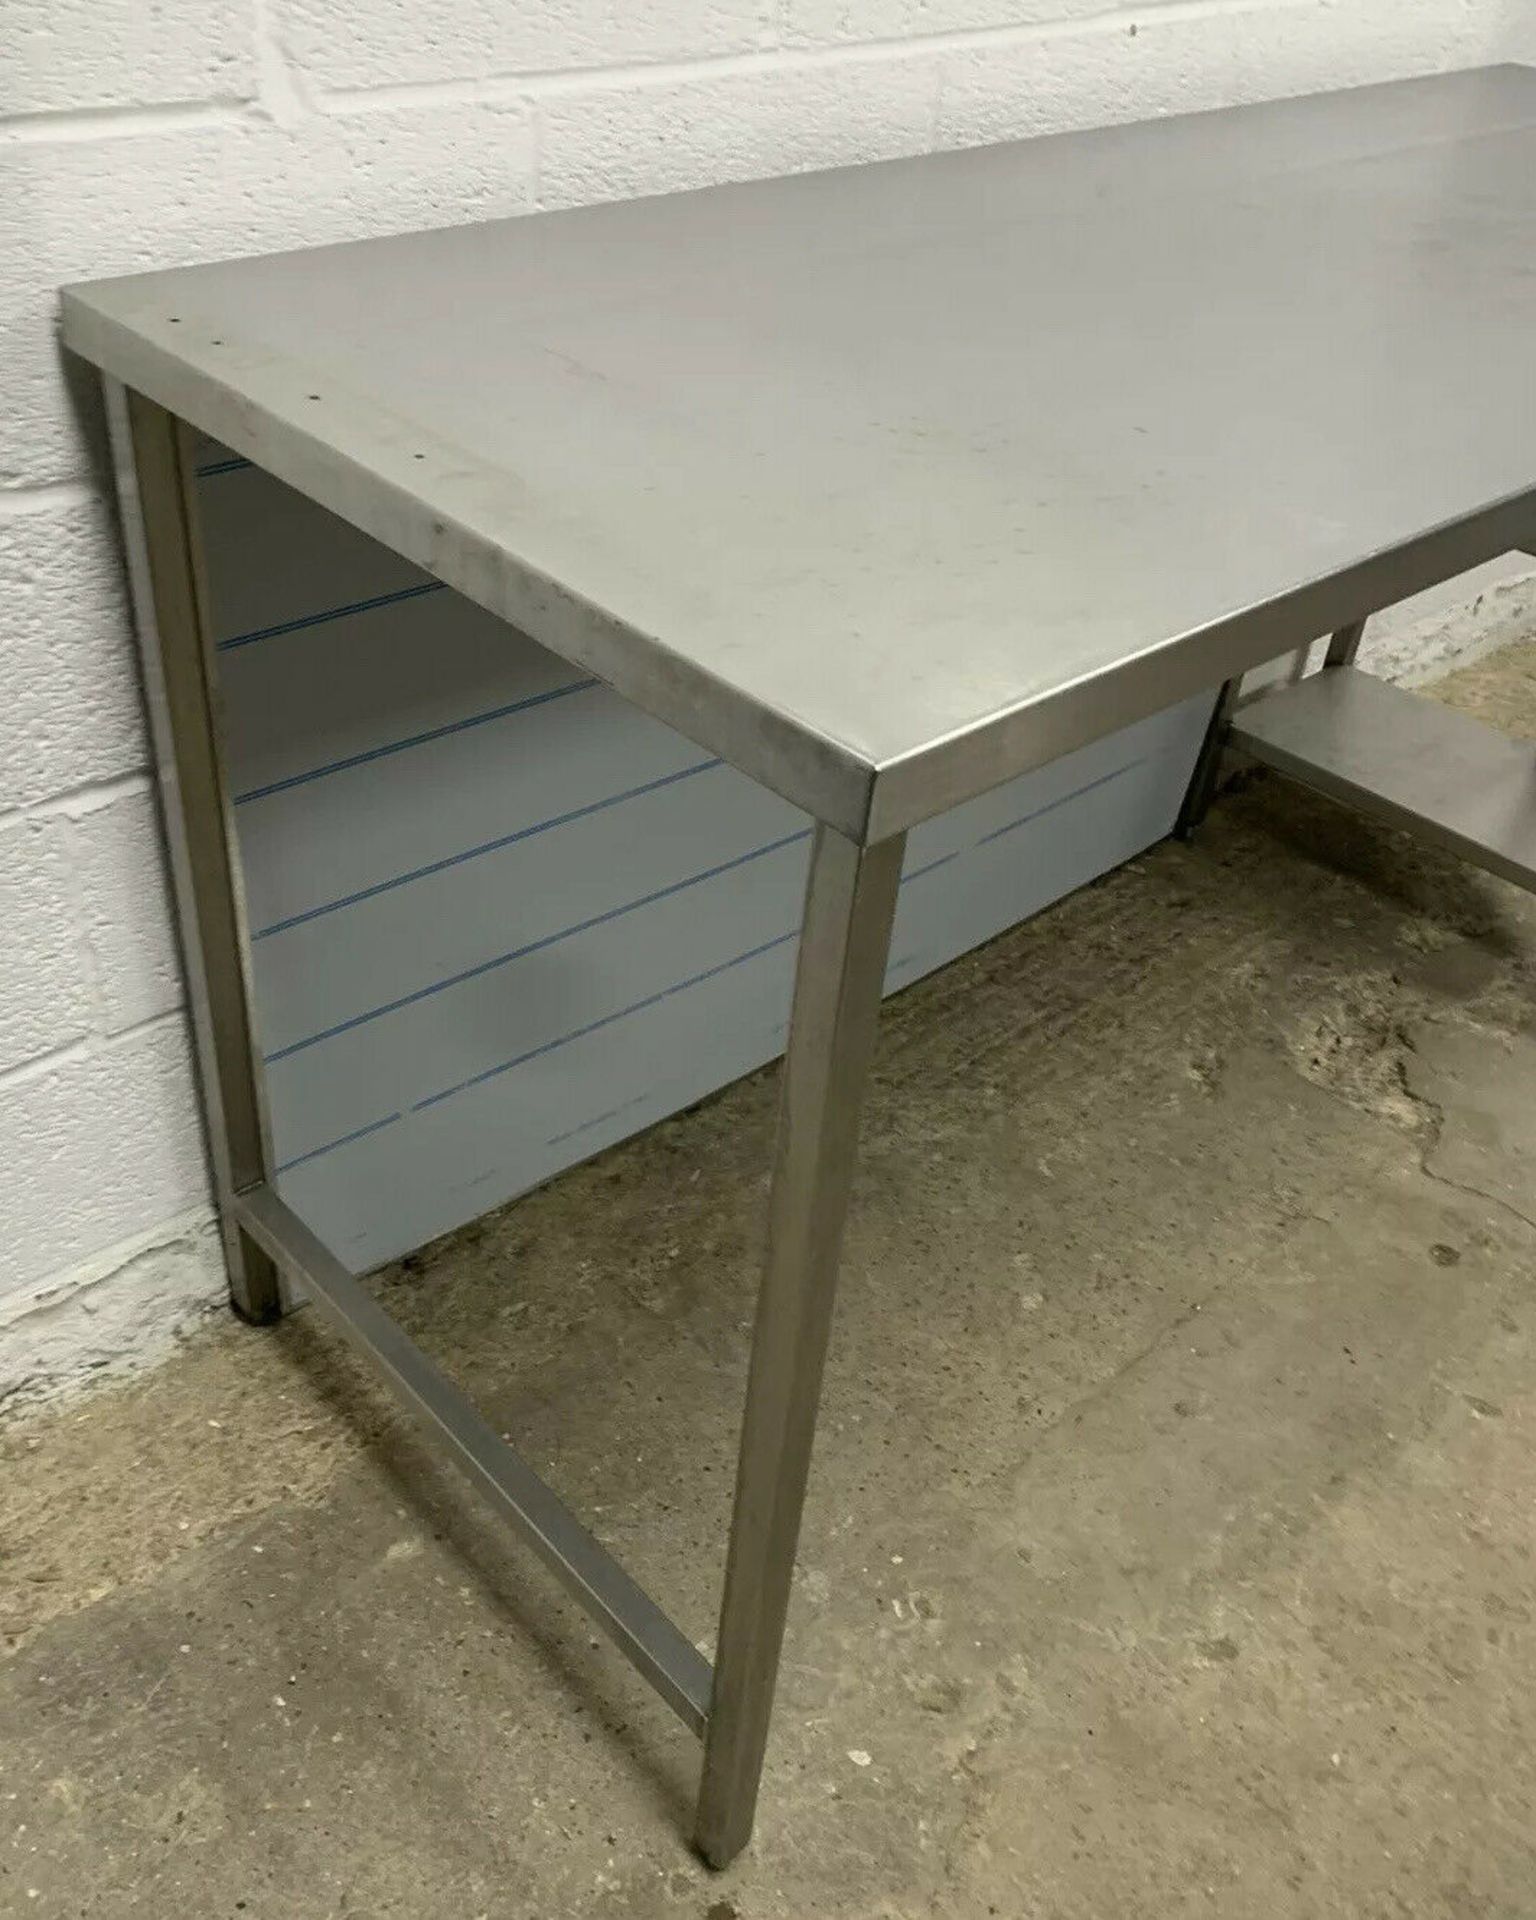 Stainless Steel Preparation Table - Image 2 of 4